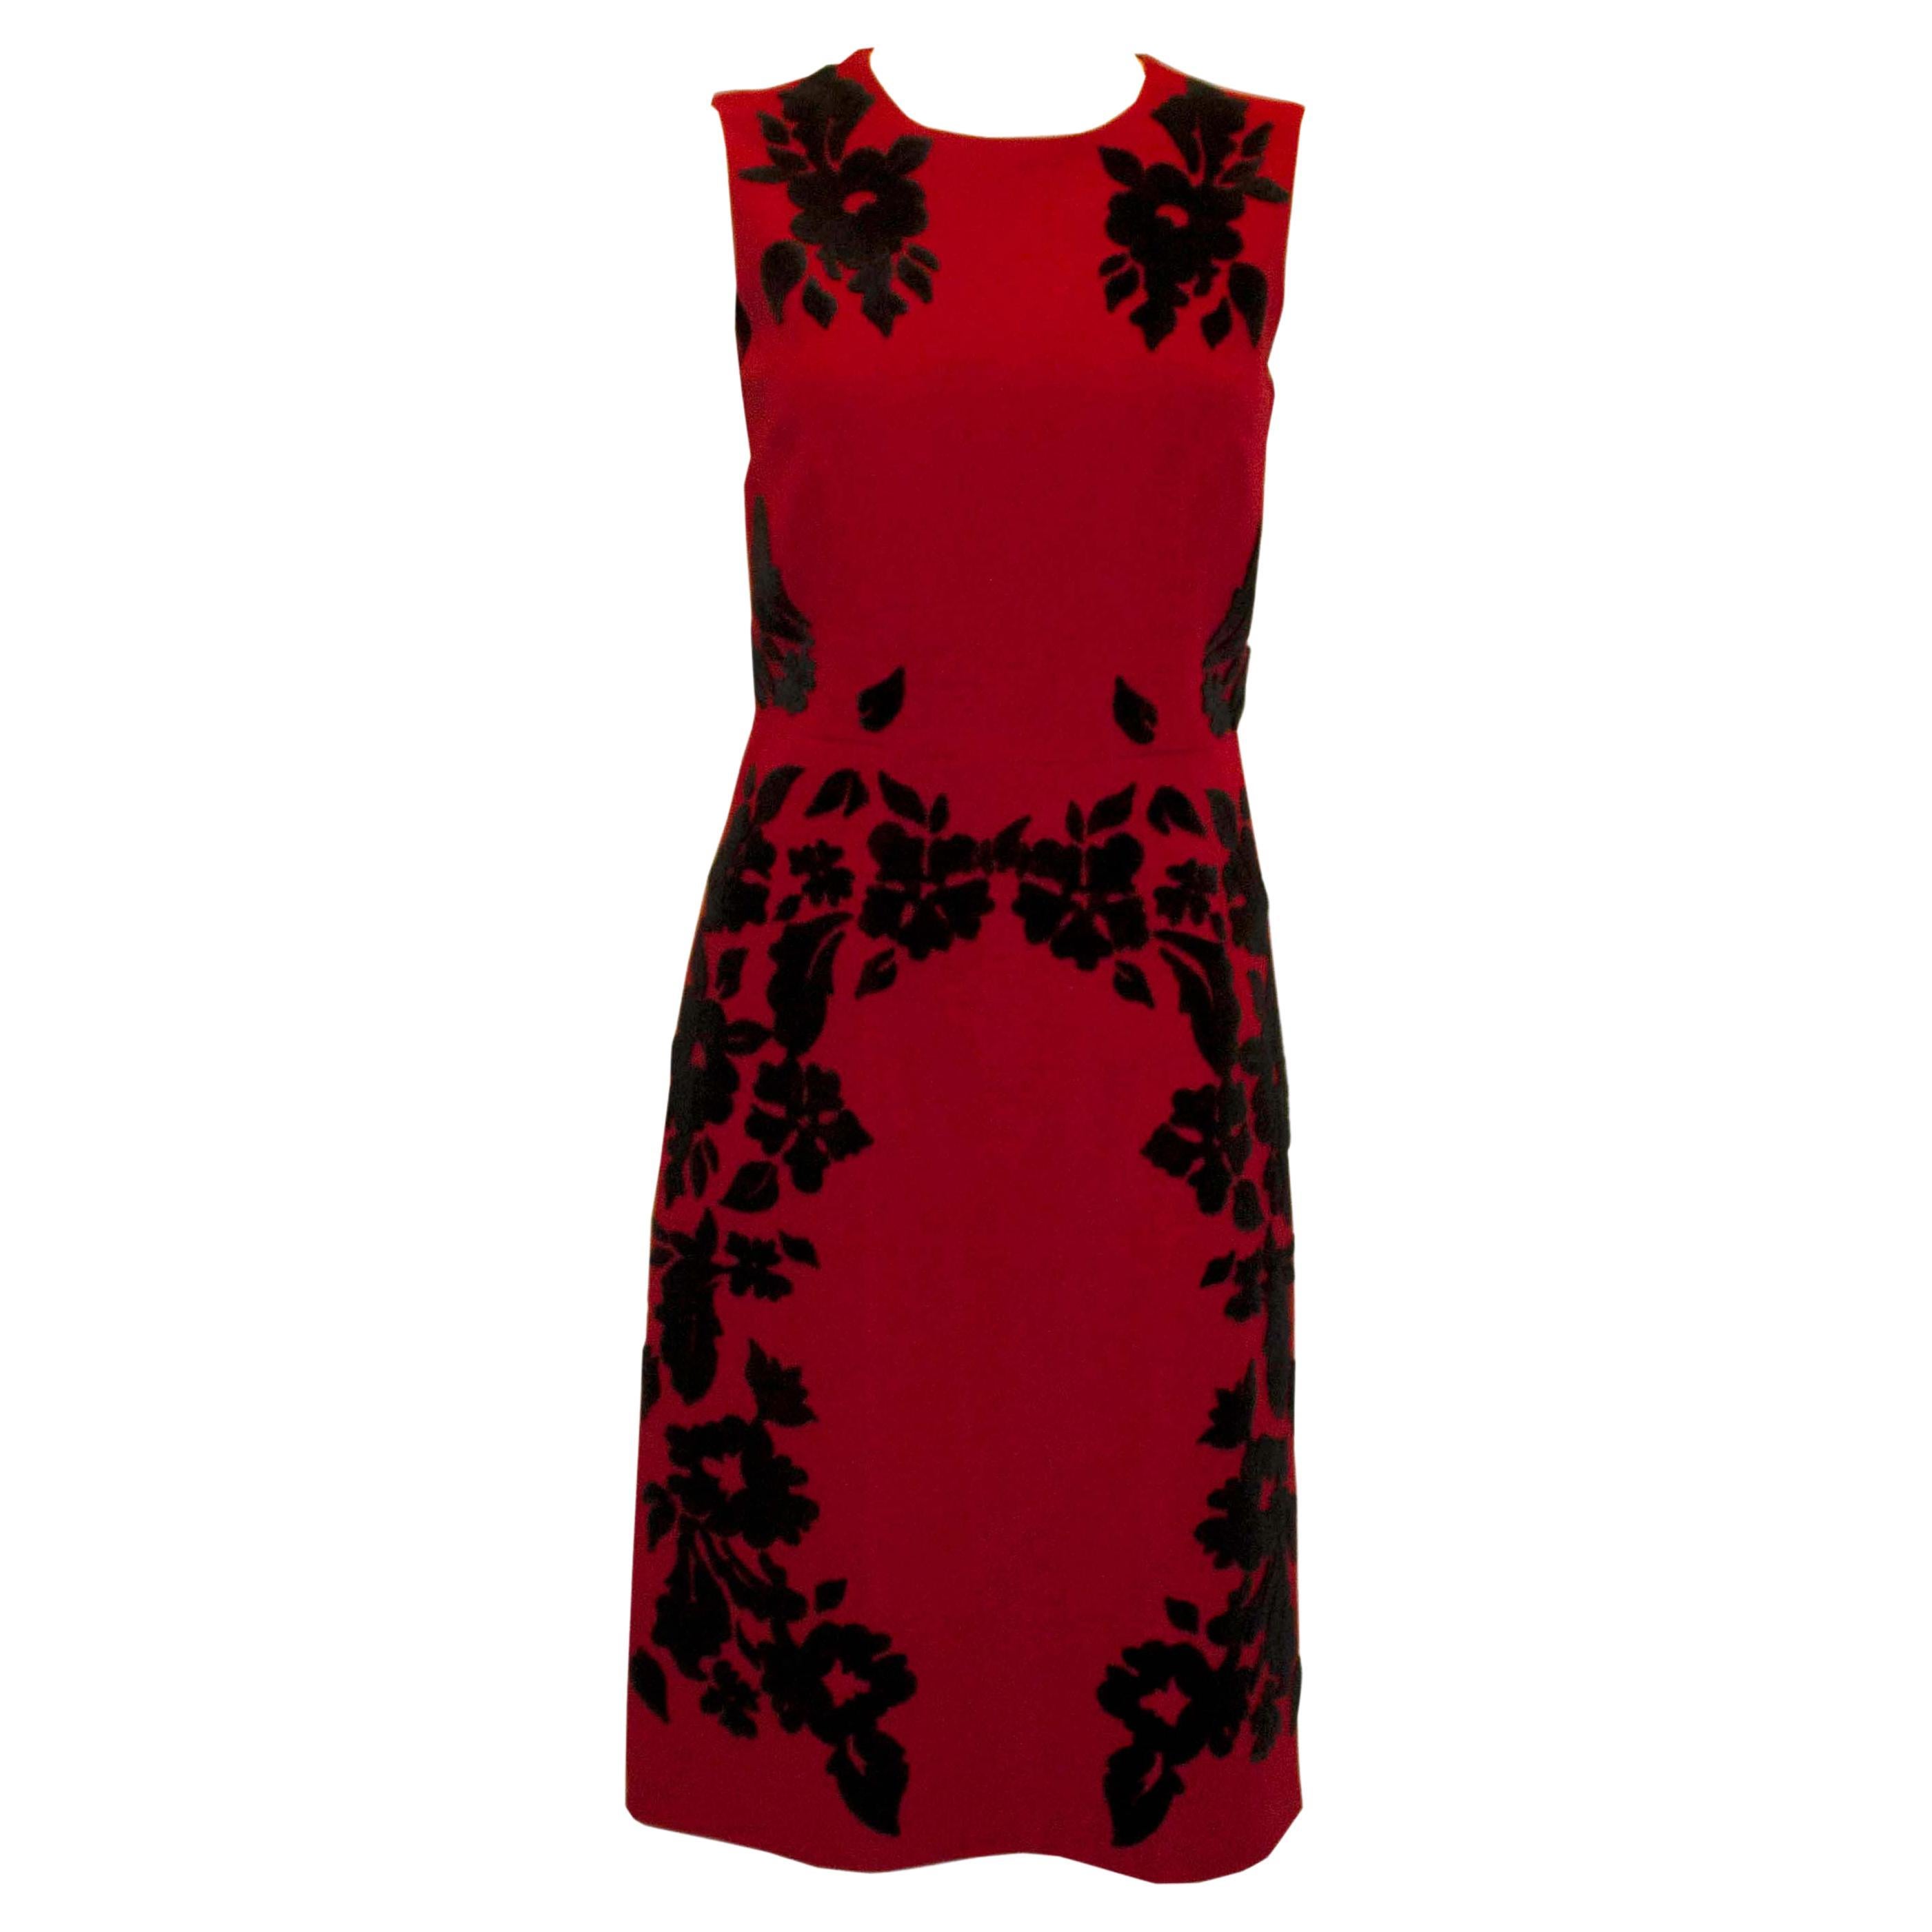 Dolce and Gabanna Black and Dress For at | red and black dress, red black dress, red dress with black